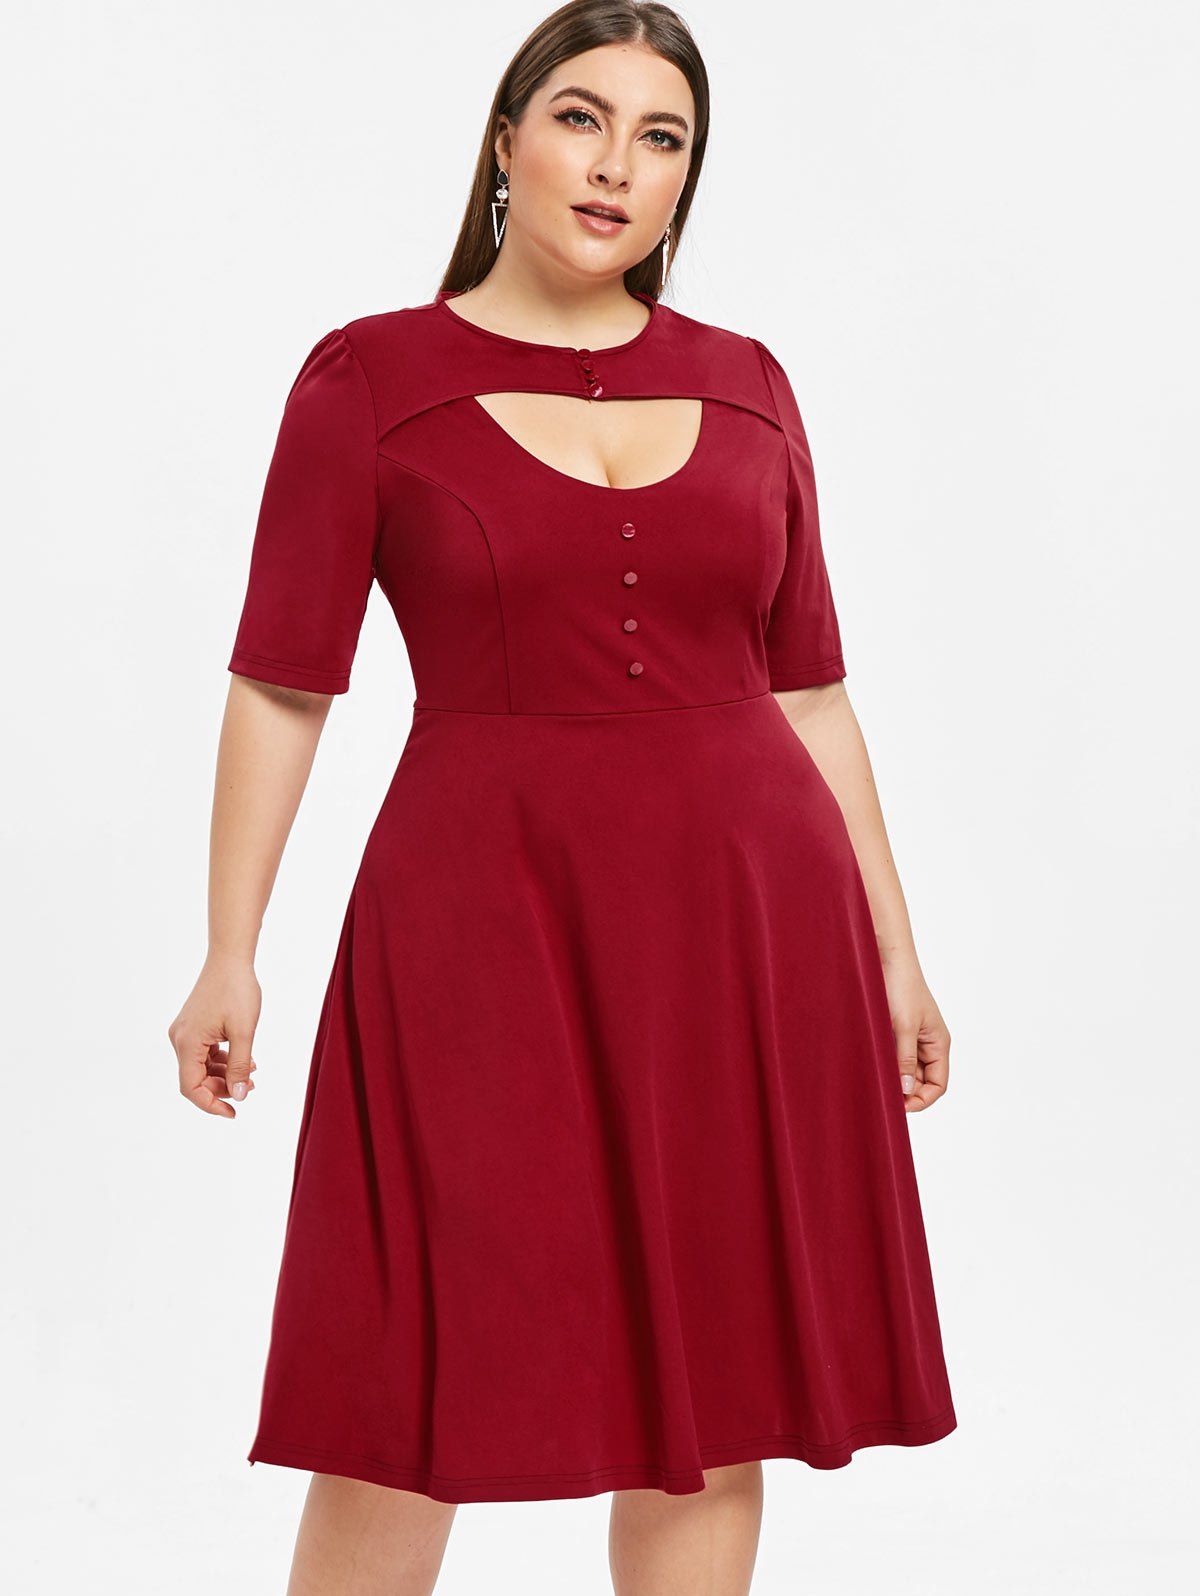 [29% OFF] 2020 Round Neck Plus Size Cut Out Fit And Flare Dress In RED ...